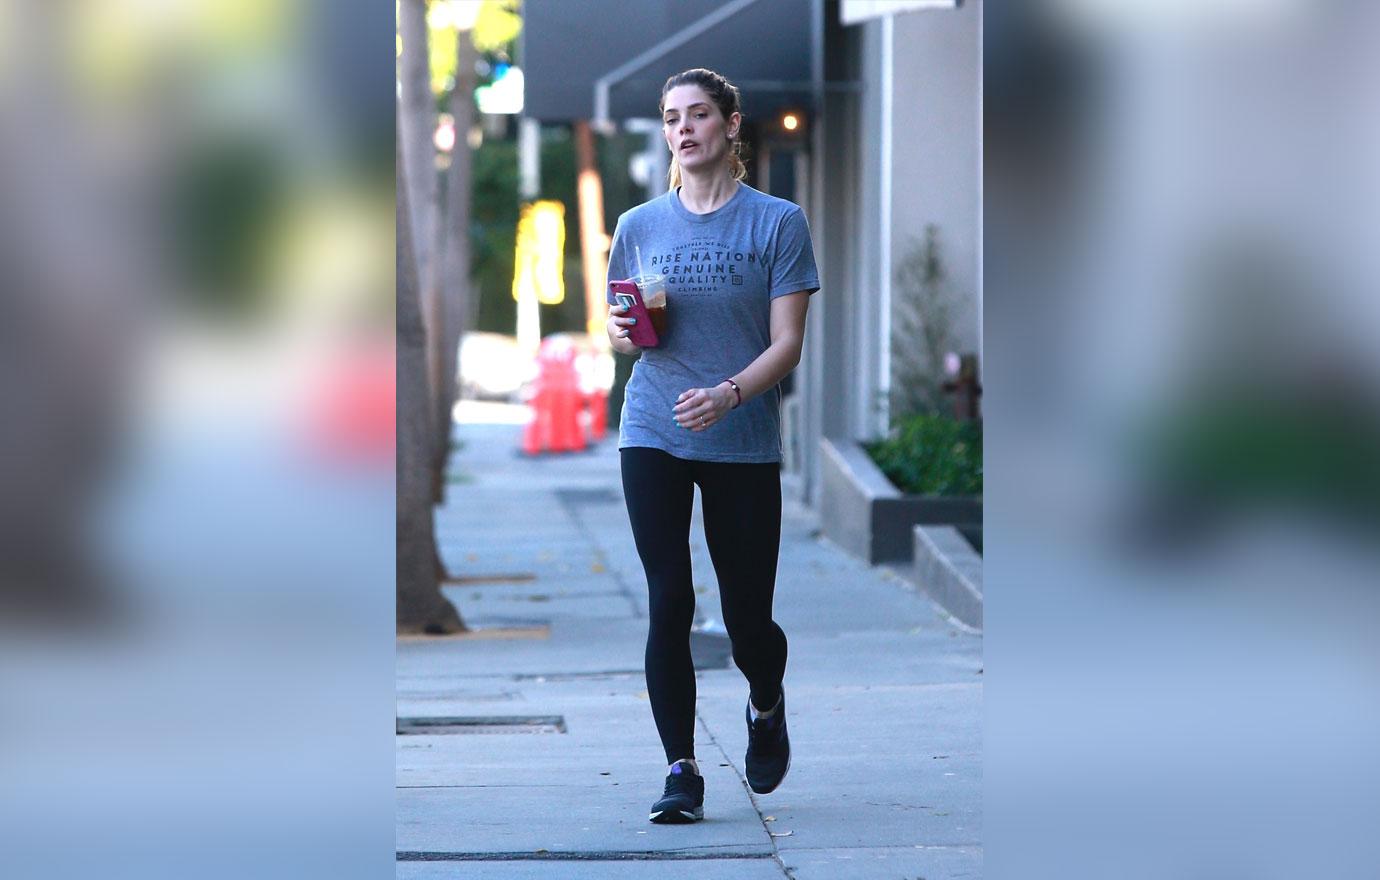 Kaia Gerber showcases her mile-long legs in heather grey leggings while  leaving her Pilates class